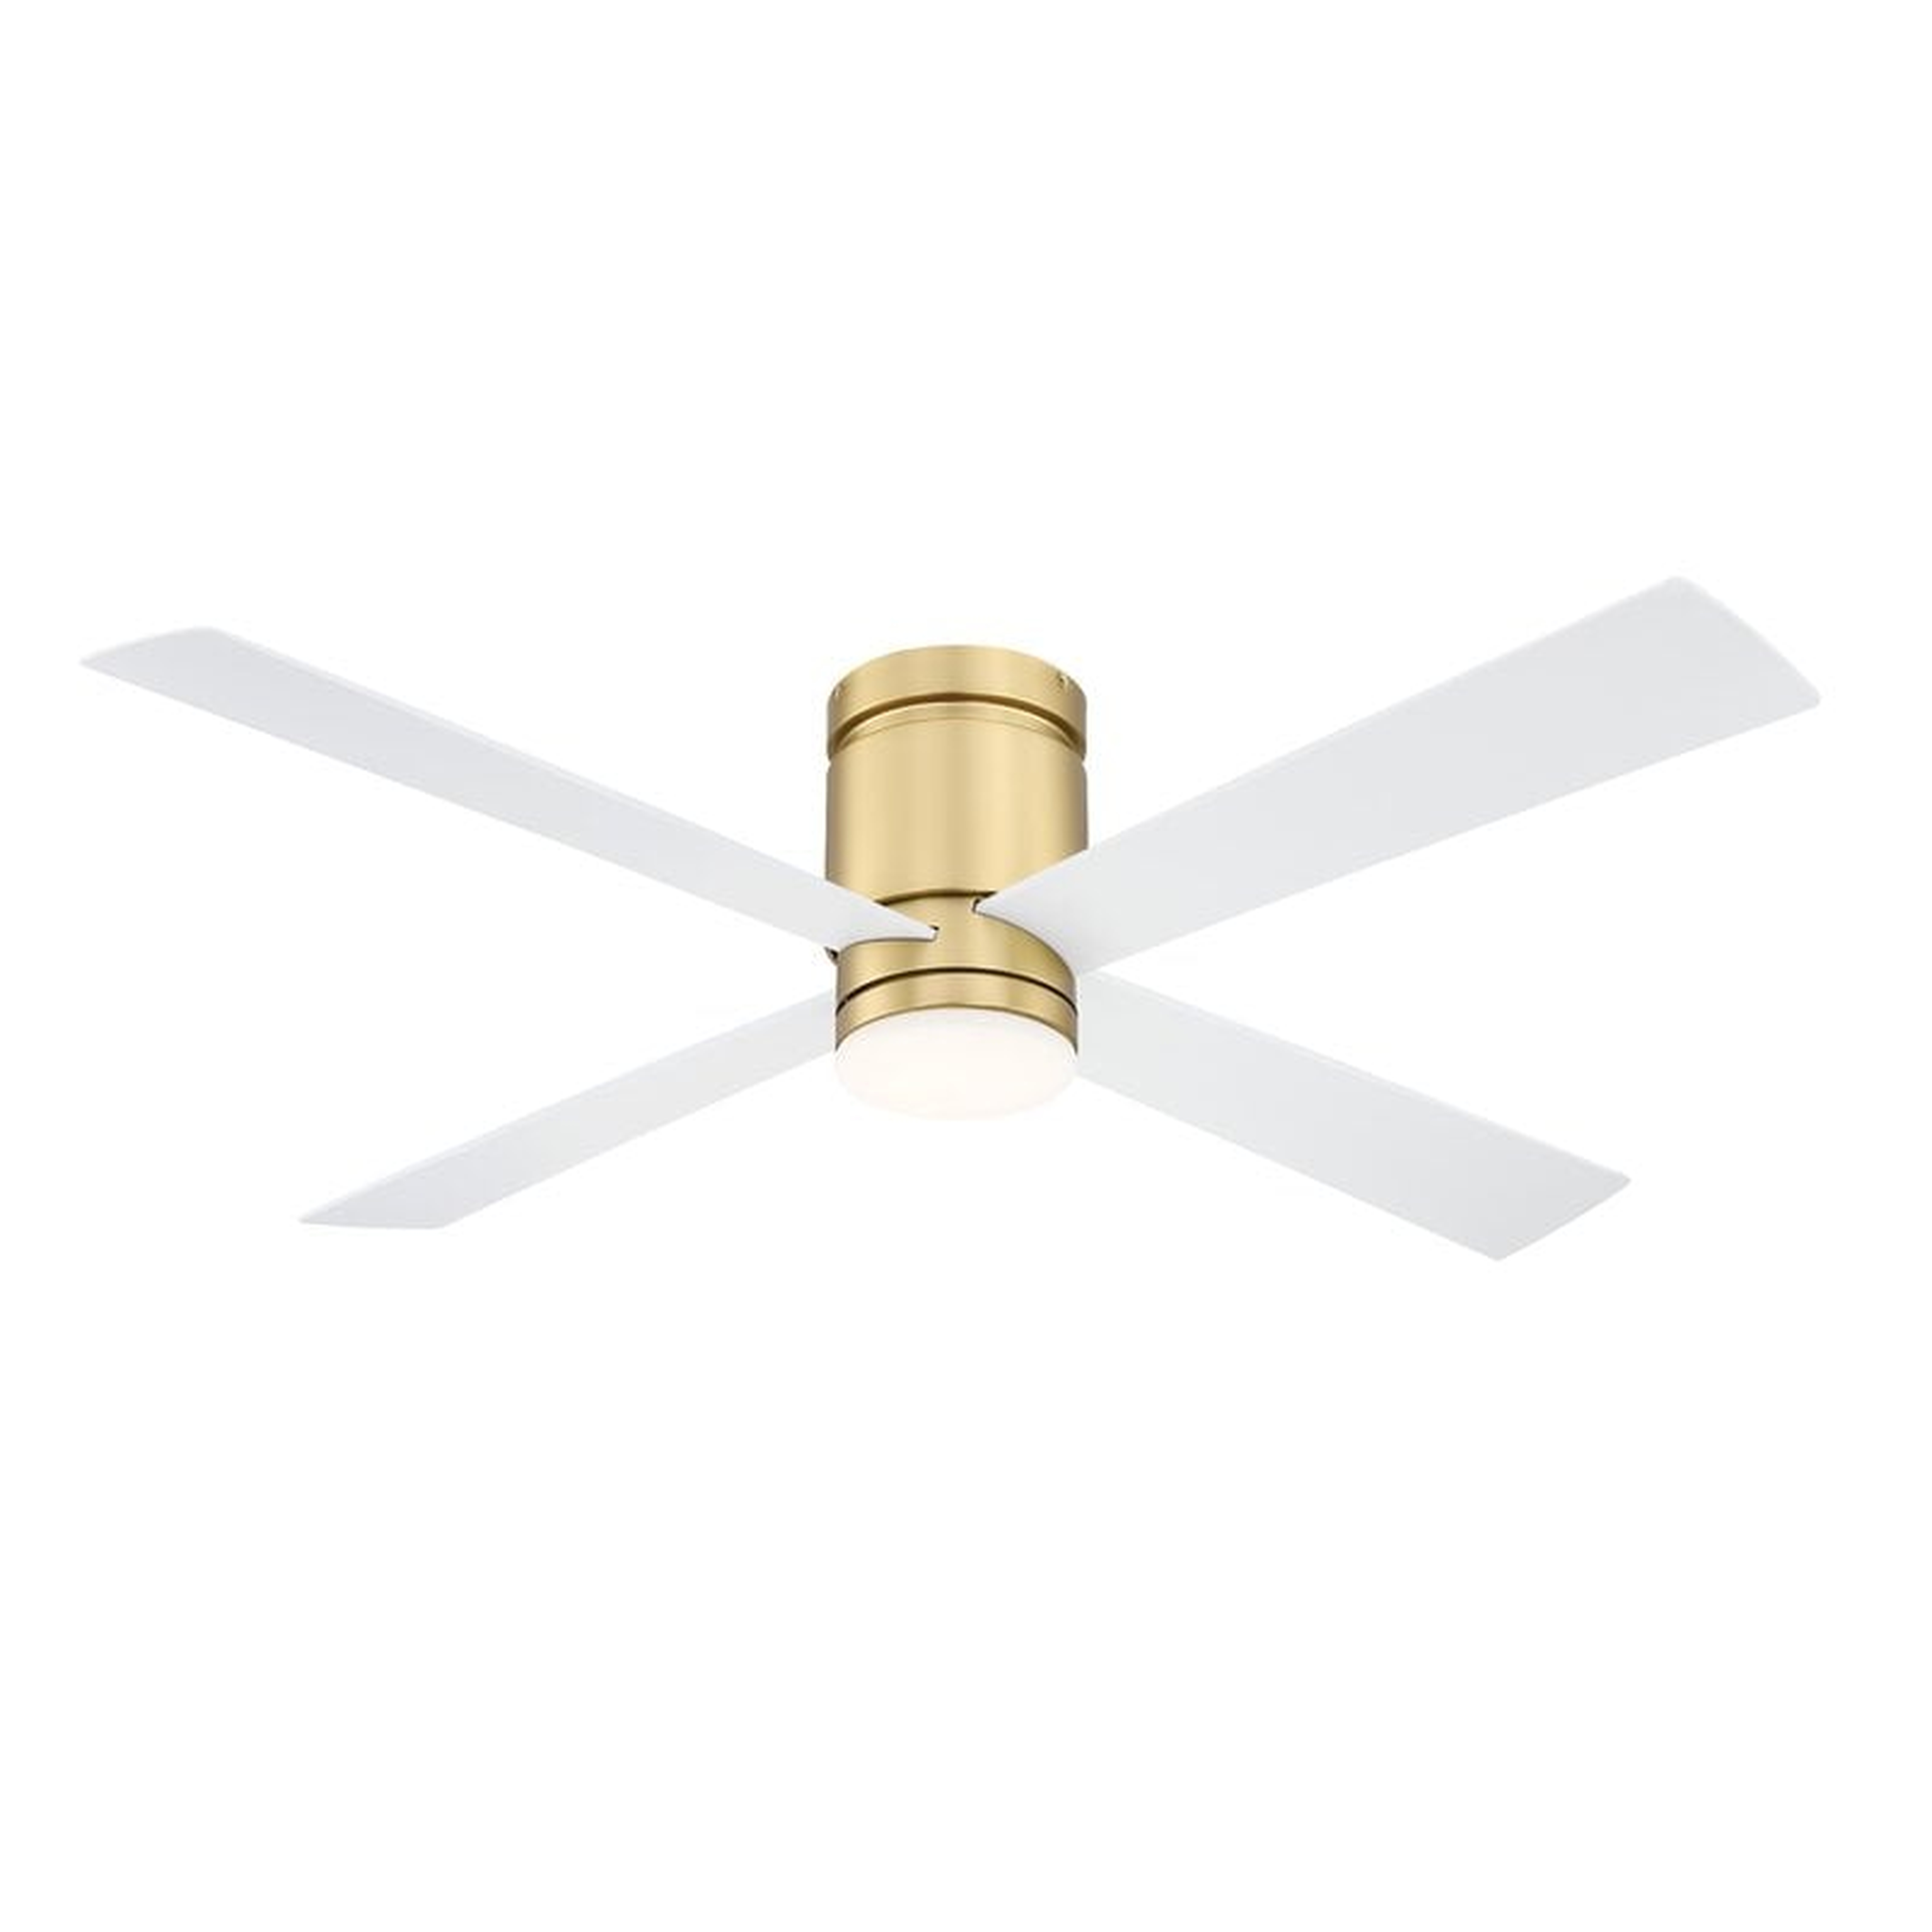 52'' Kwartet 4-Blade LED Smart Standard Ceiling Fan with Light Kit Included, Brushed Satin Brass with Matte White Blades - Wayfair